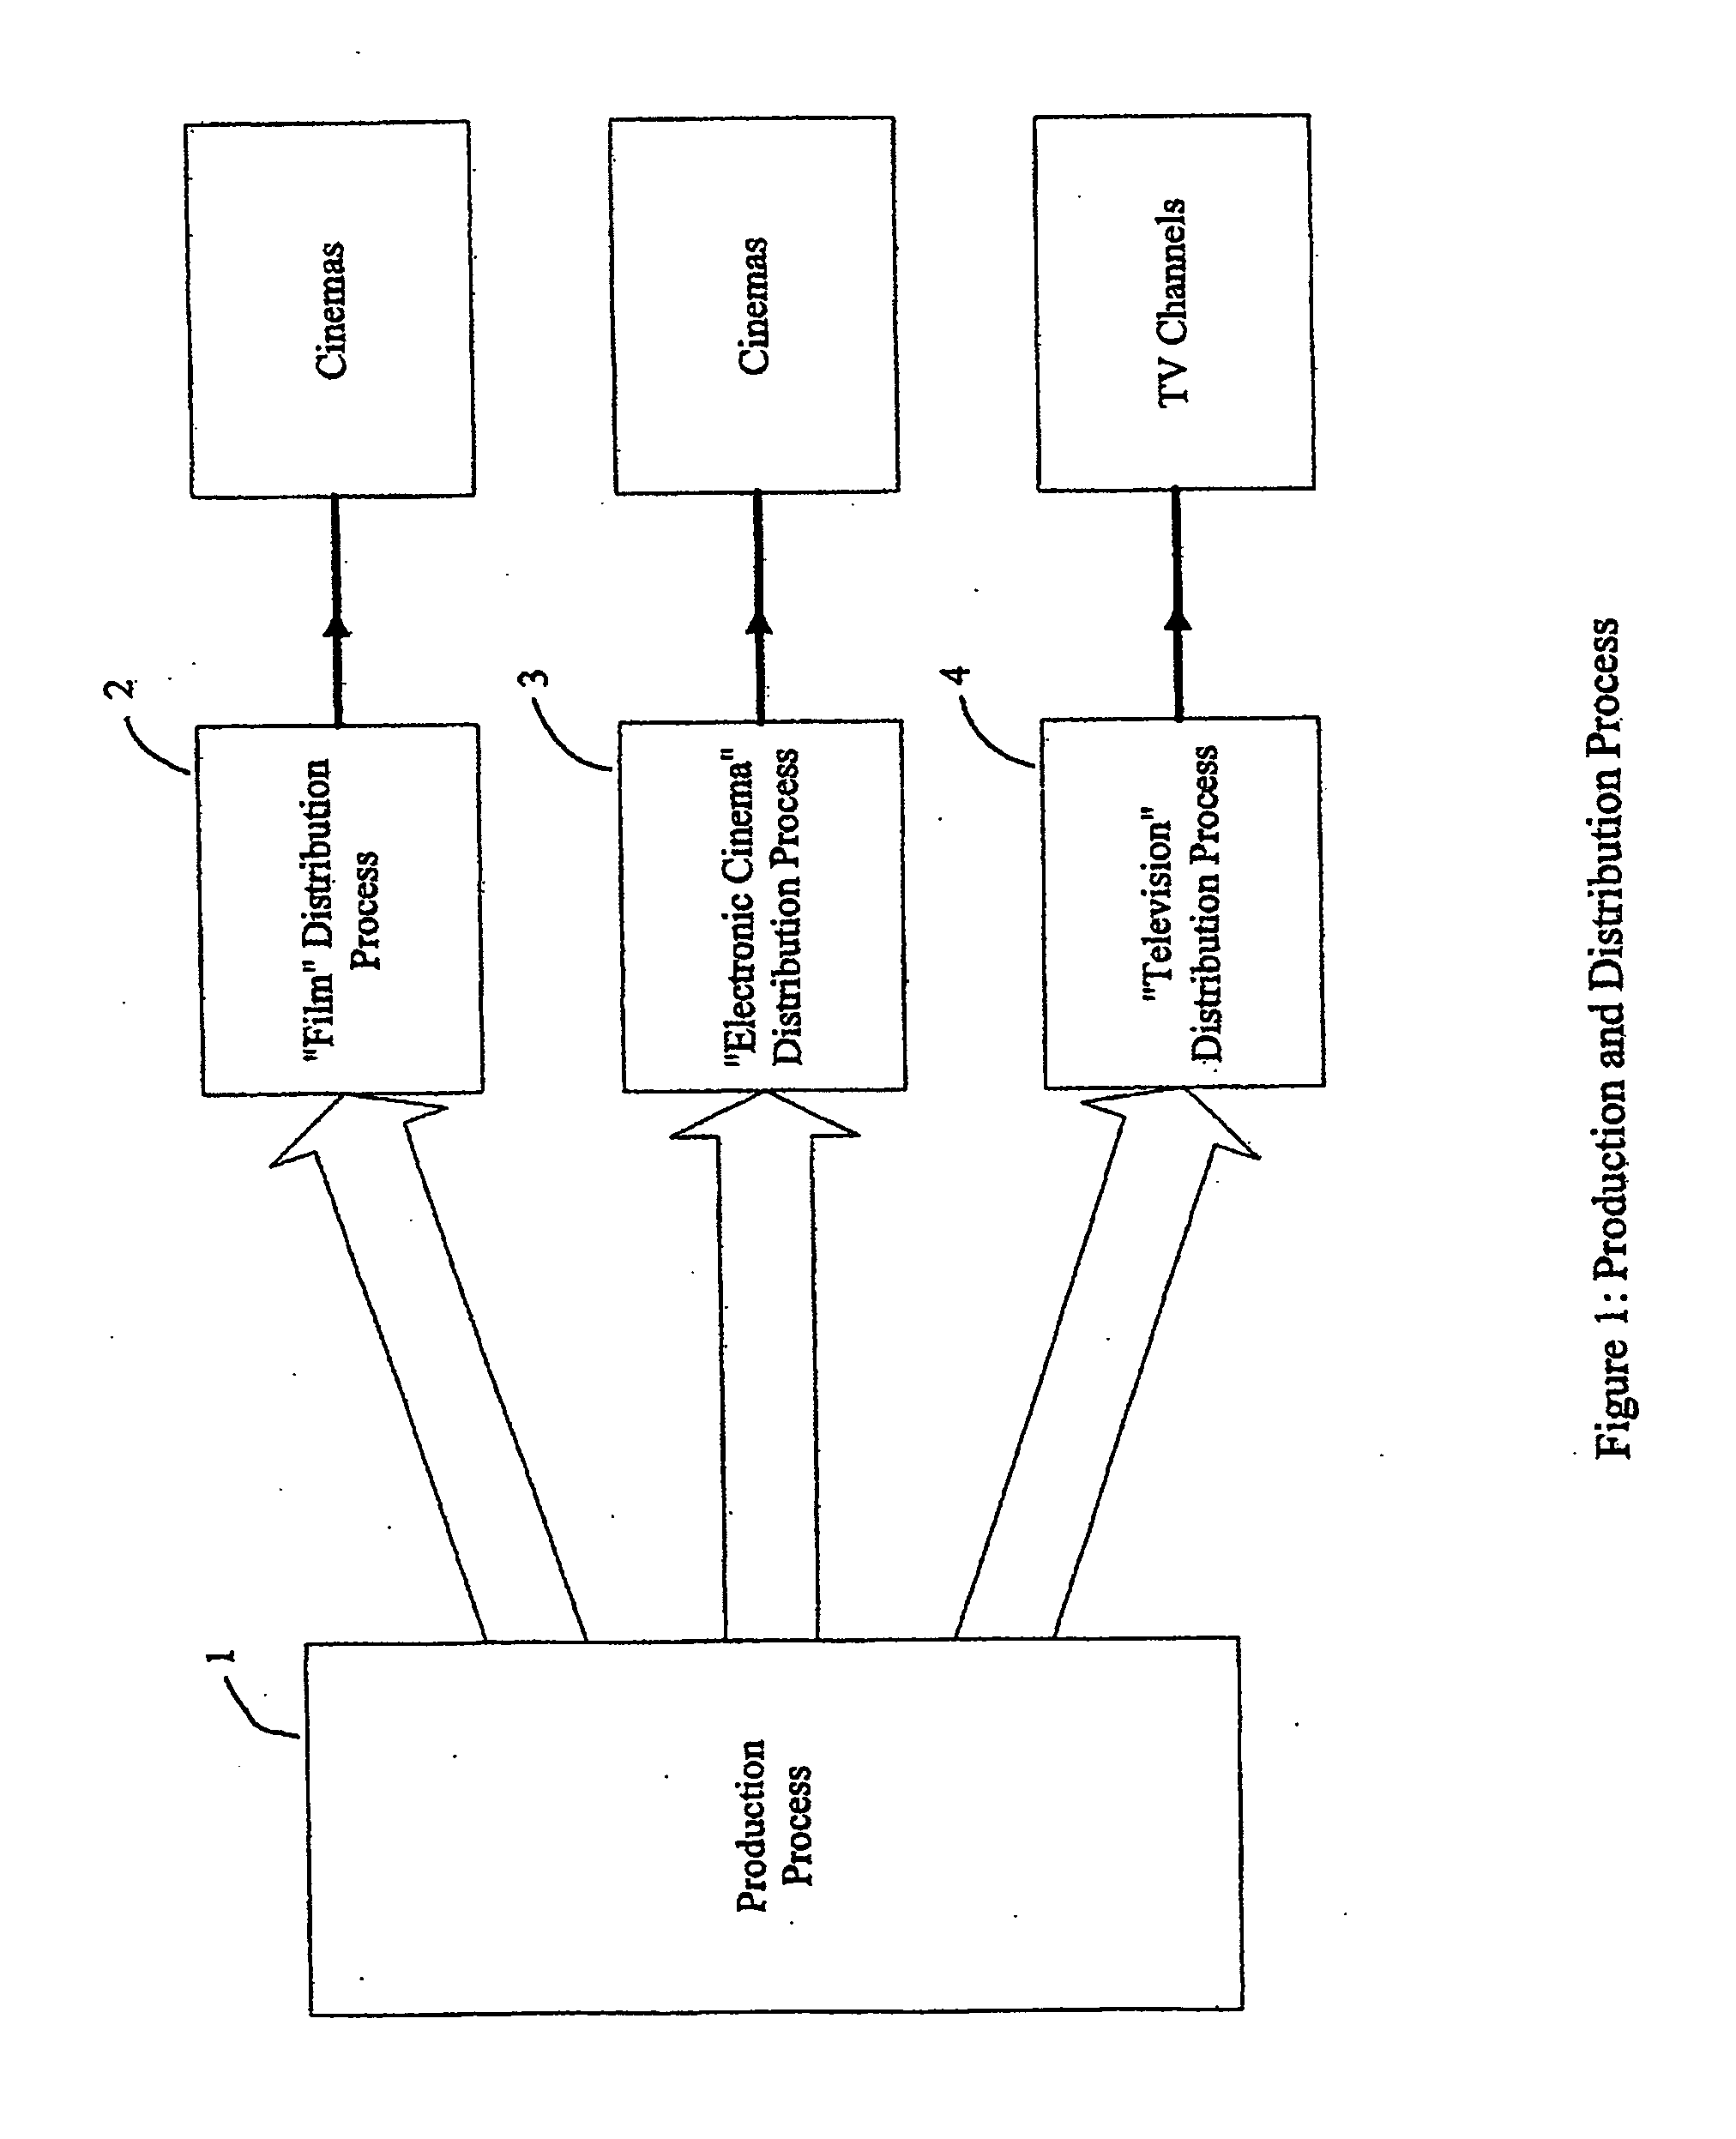 System and method for display control